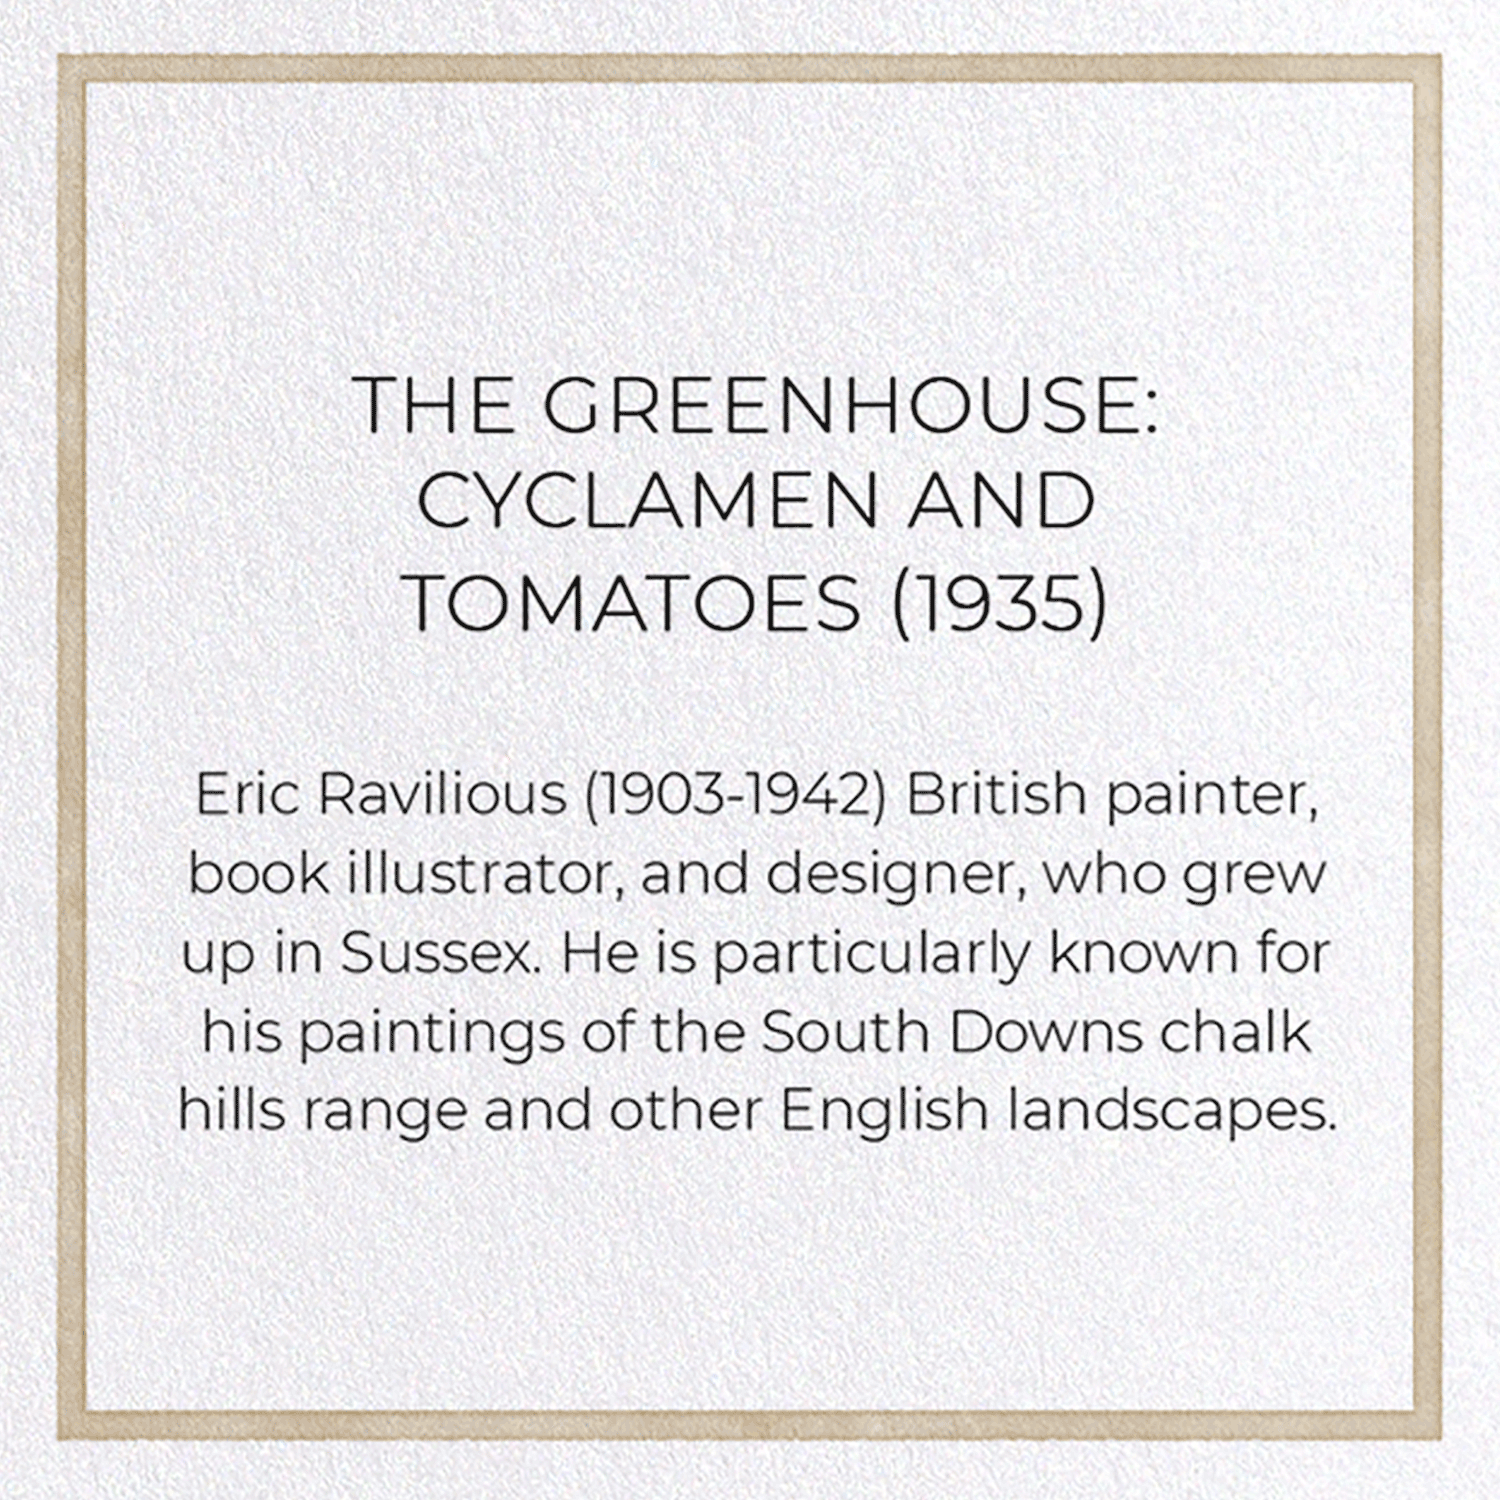 THE GREENHOUSE: CYCLAMEN AND TOMATOES (1935)